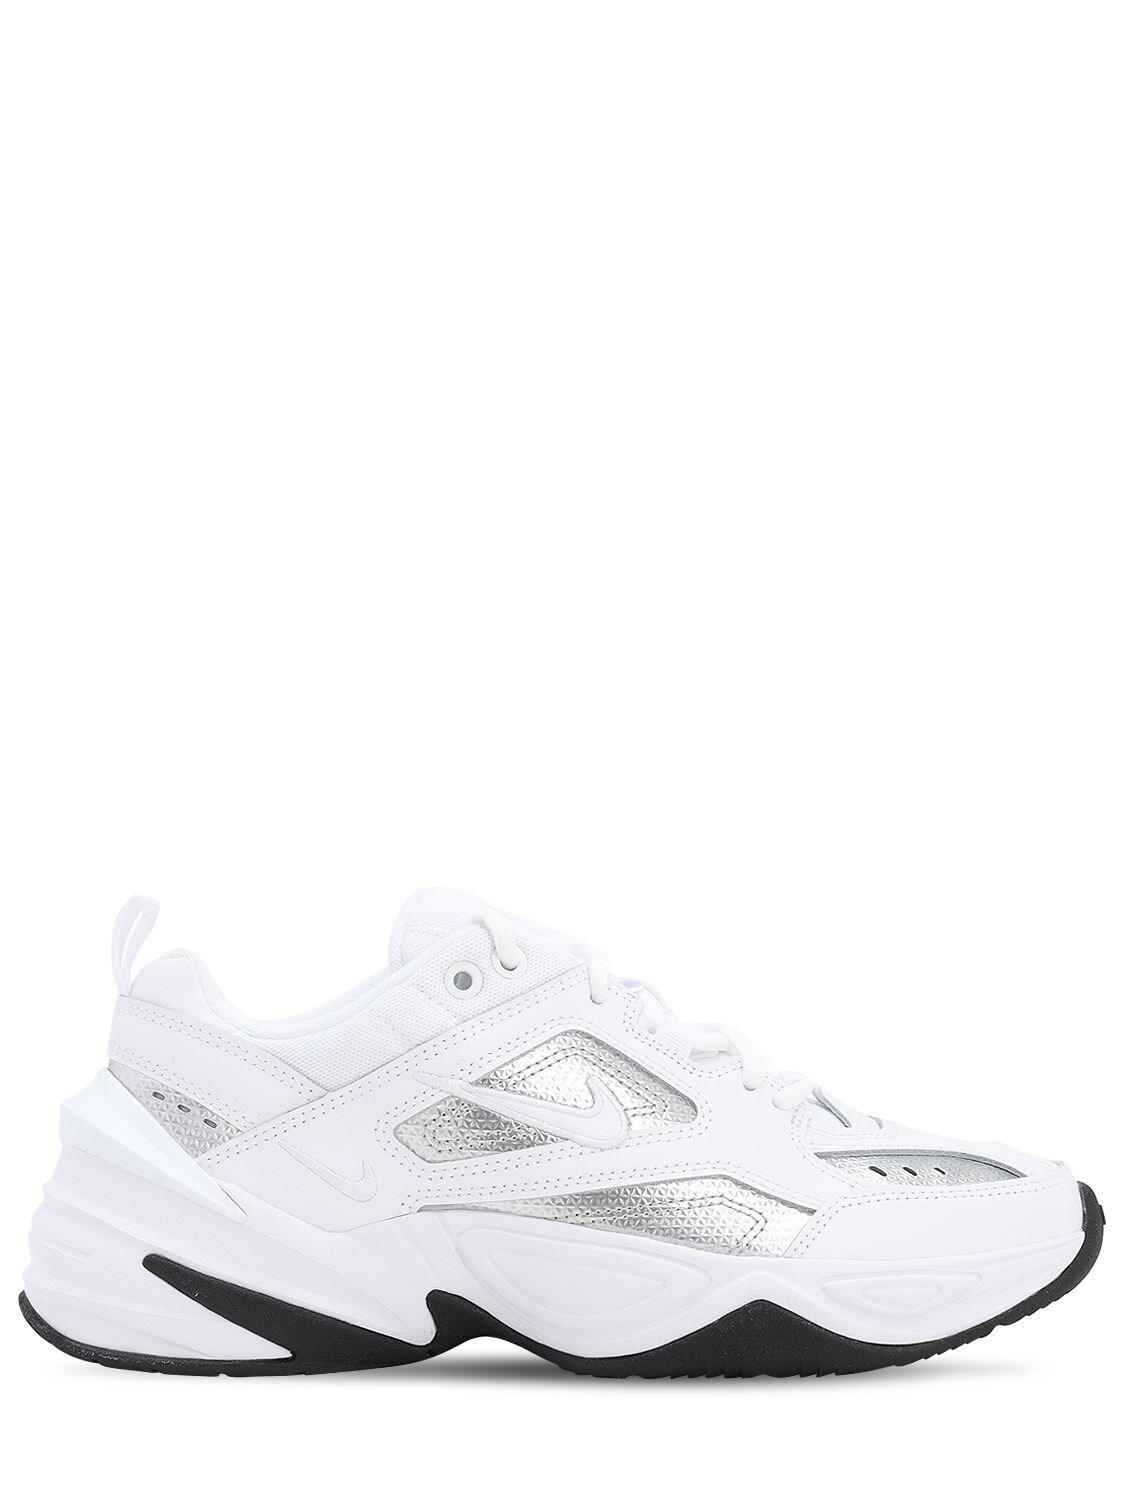 Nike Leather White & Silver M2k Tekno Trainers | Lyst